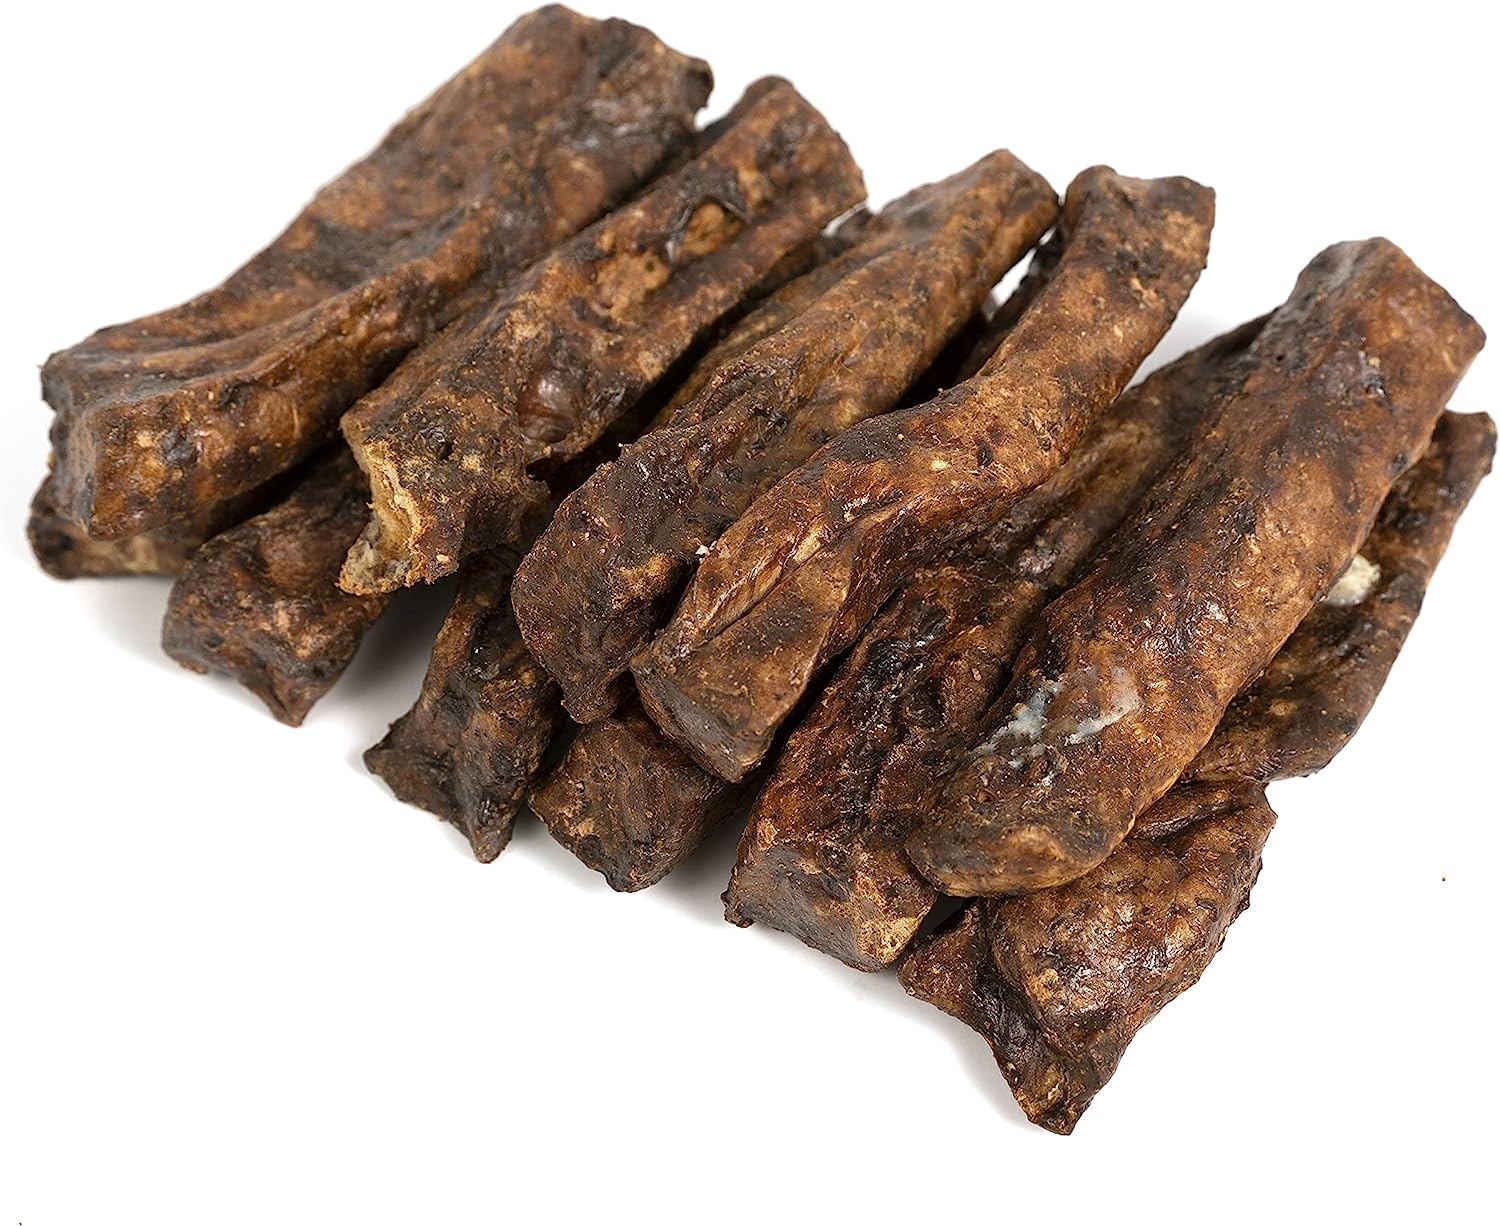 BRUTUS & BARNABY Beef Meat Sticks for Dogs - Thick & Hearty Beef Liver & Lung Dog Treat Made in USA - Protein Packed, Crunchy, Healthy Dog Treats - Grain Free, Rawhide Free, No Additives